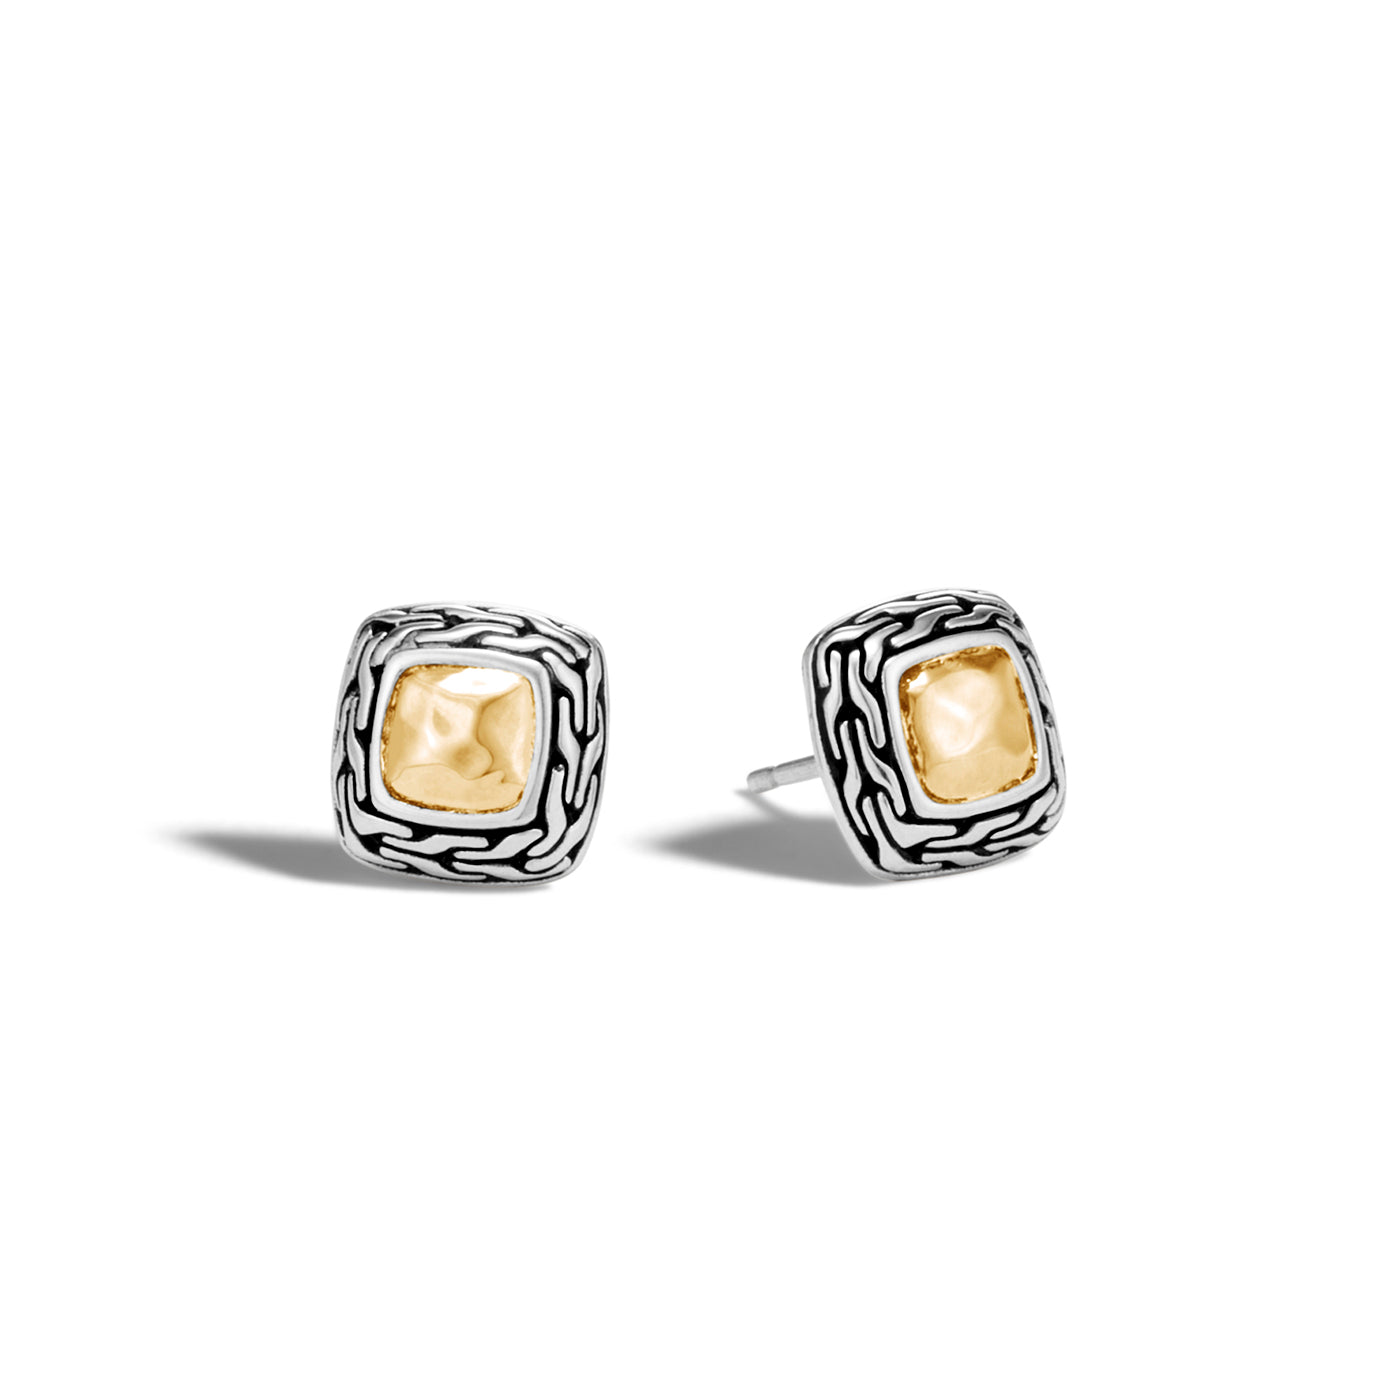 Sterling Silver and Yellow Gold Stud Earrings